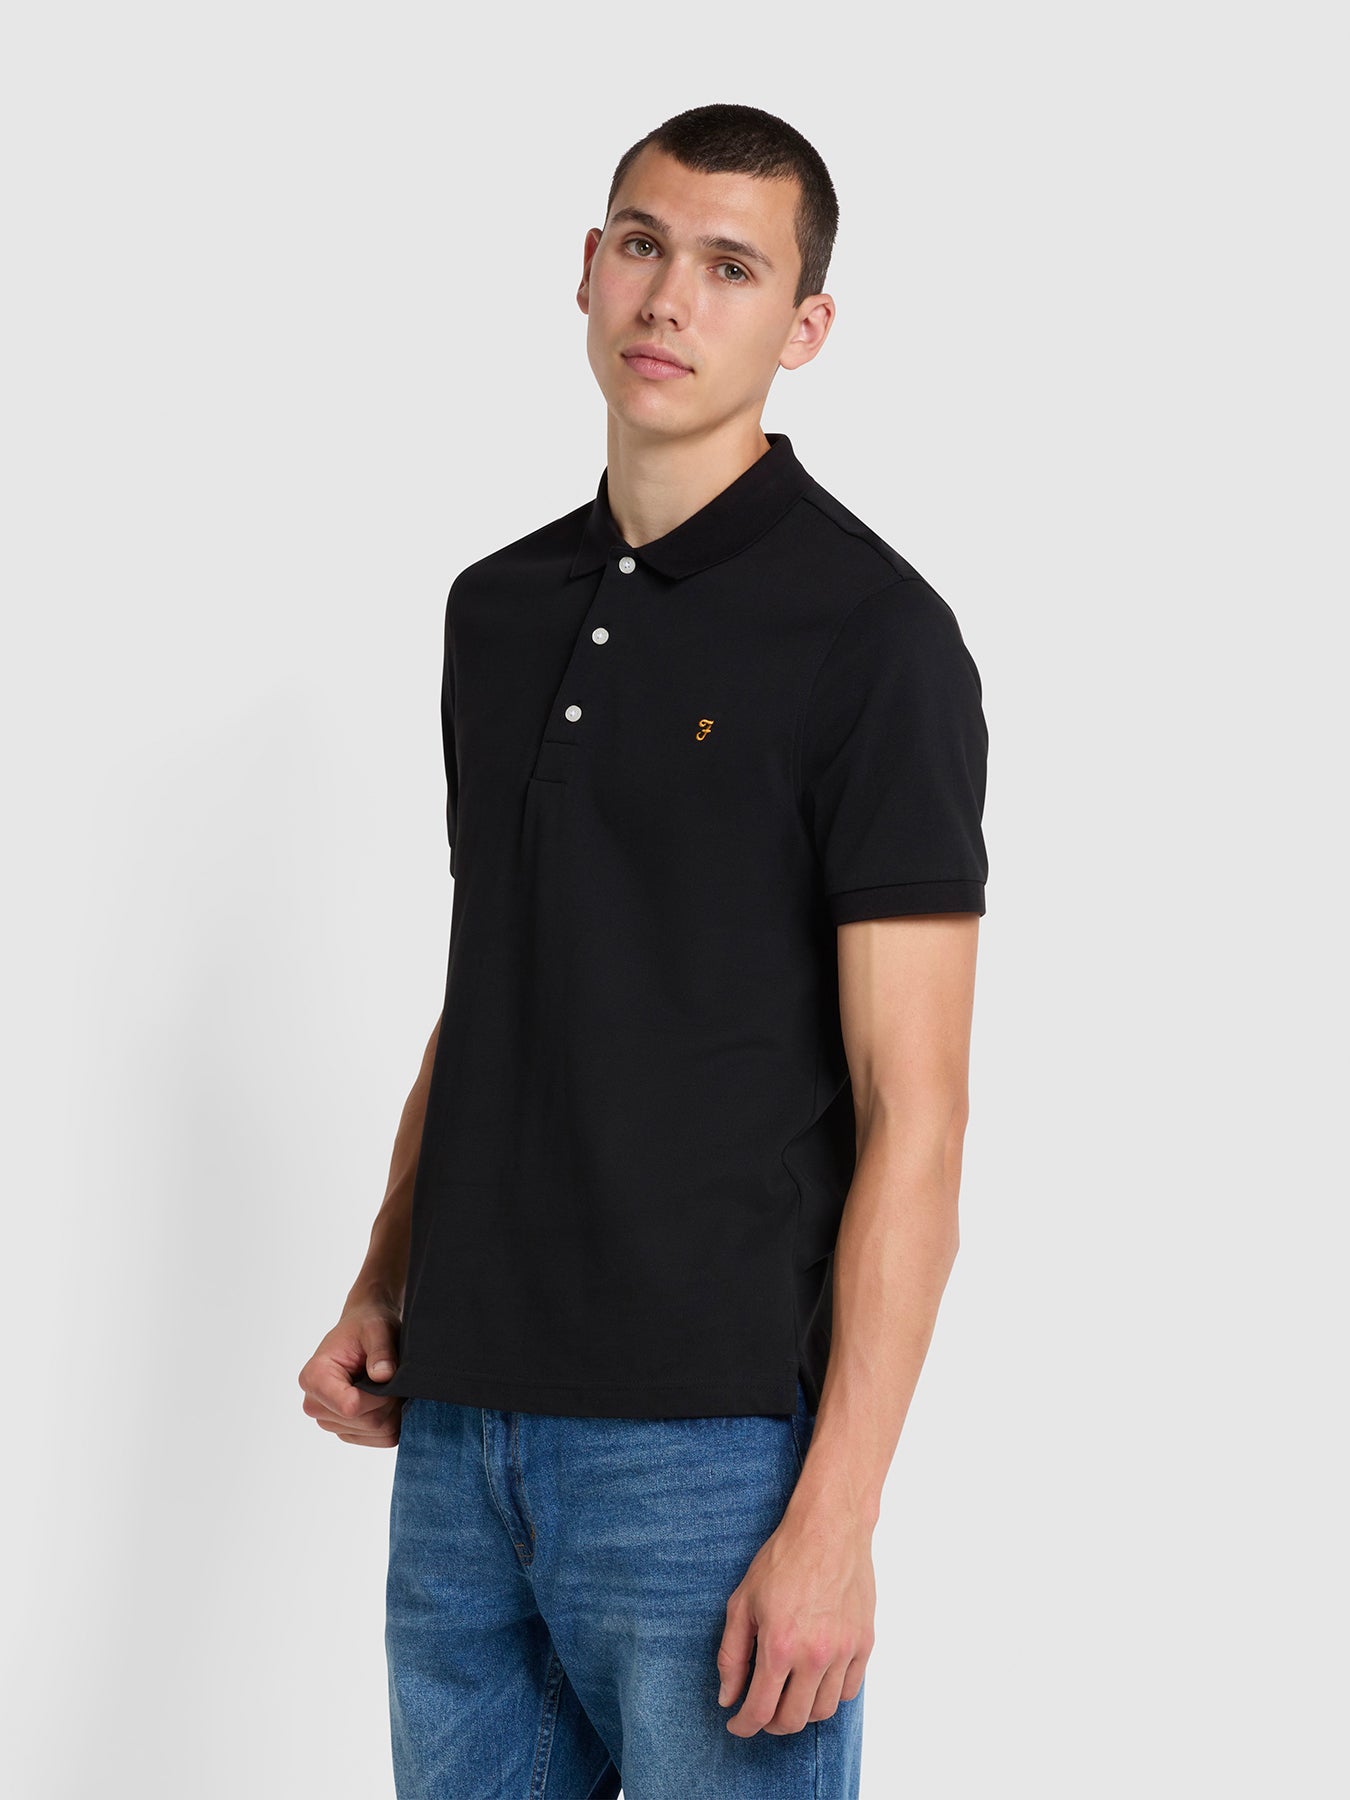 View Blanes Slim Fit Organic Cotton Polo Shirt In Black information